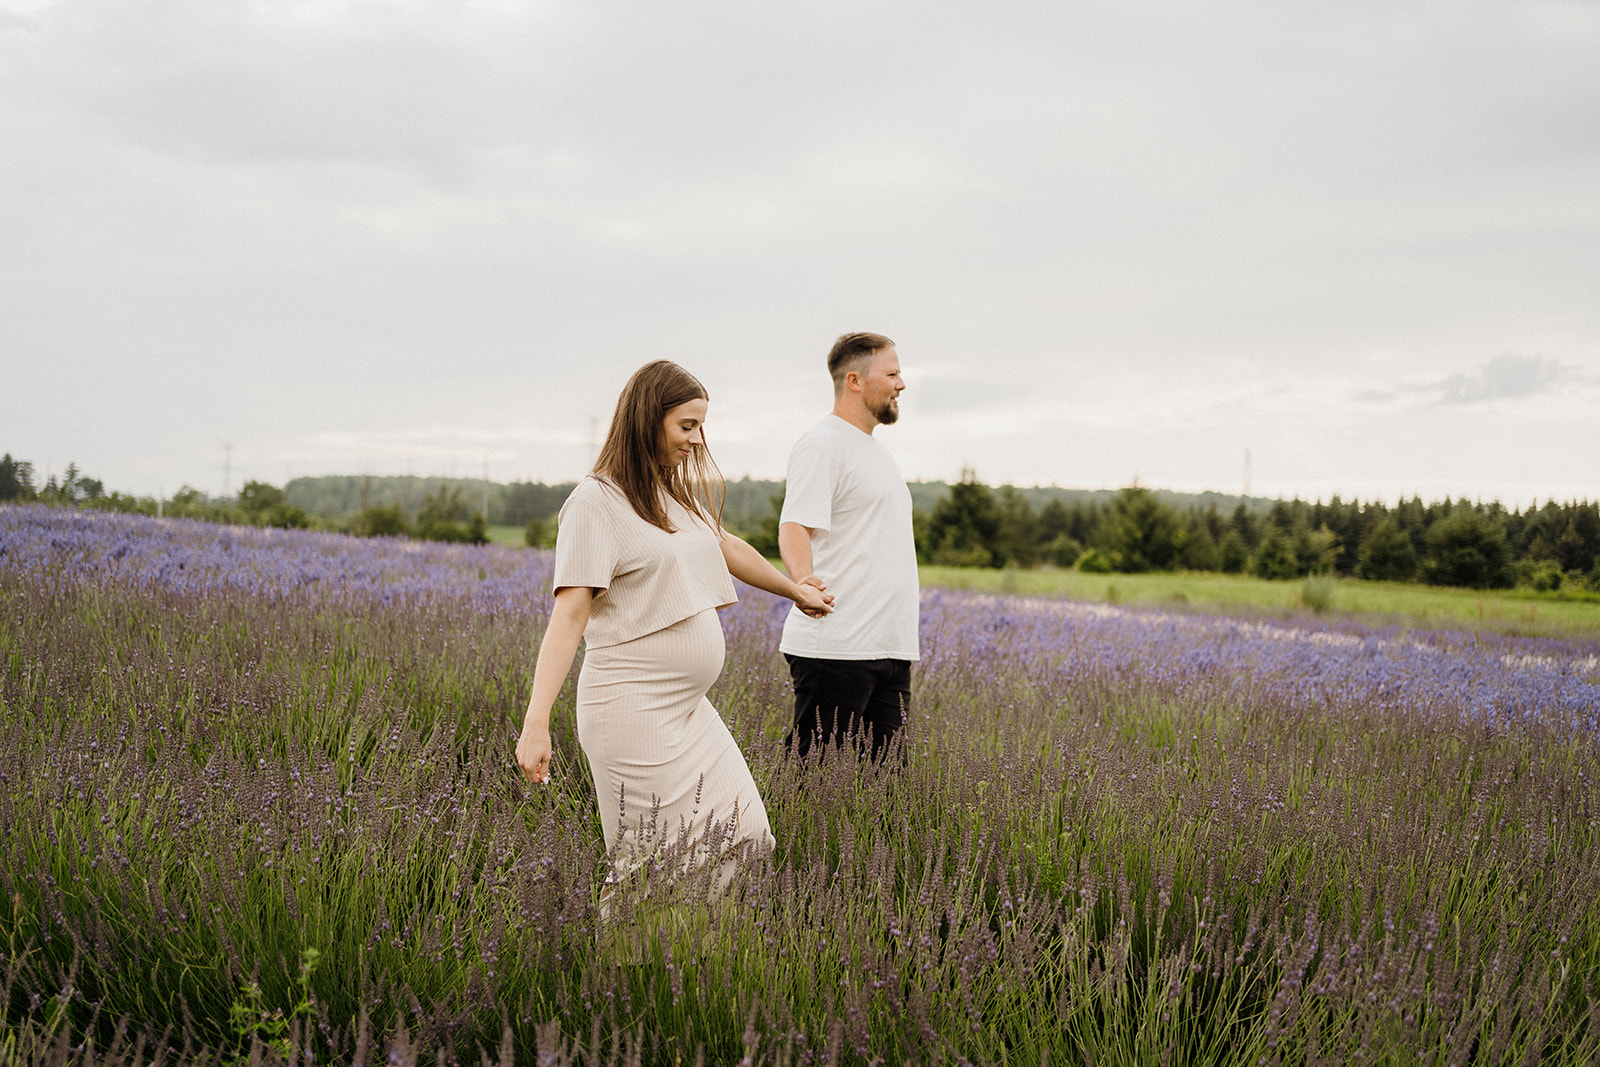 Two people holding hands in a lavender field.